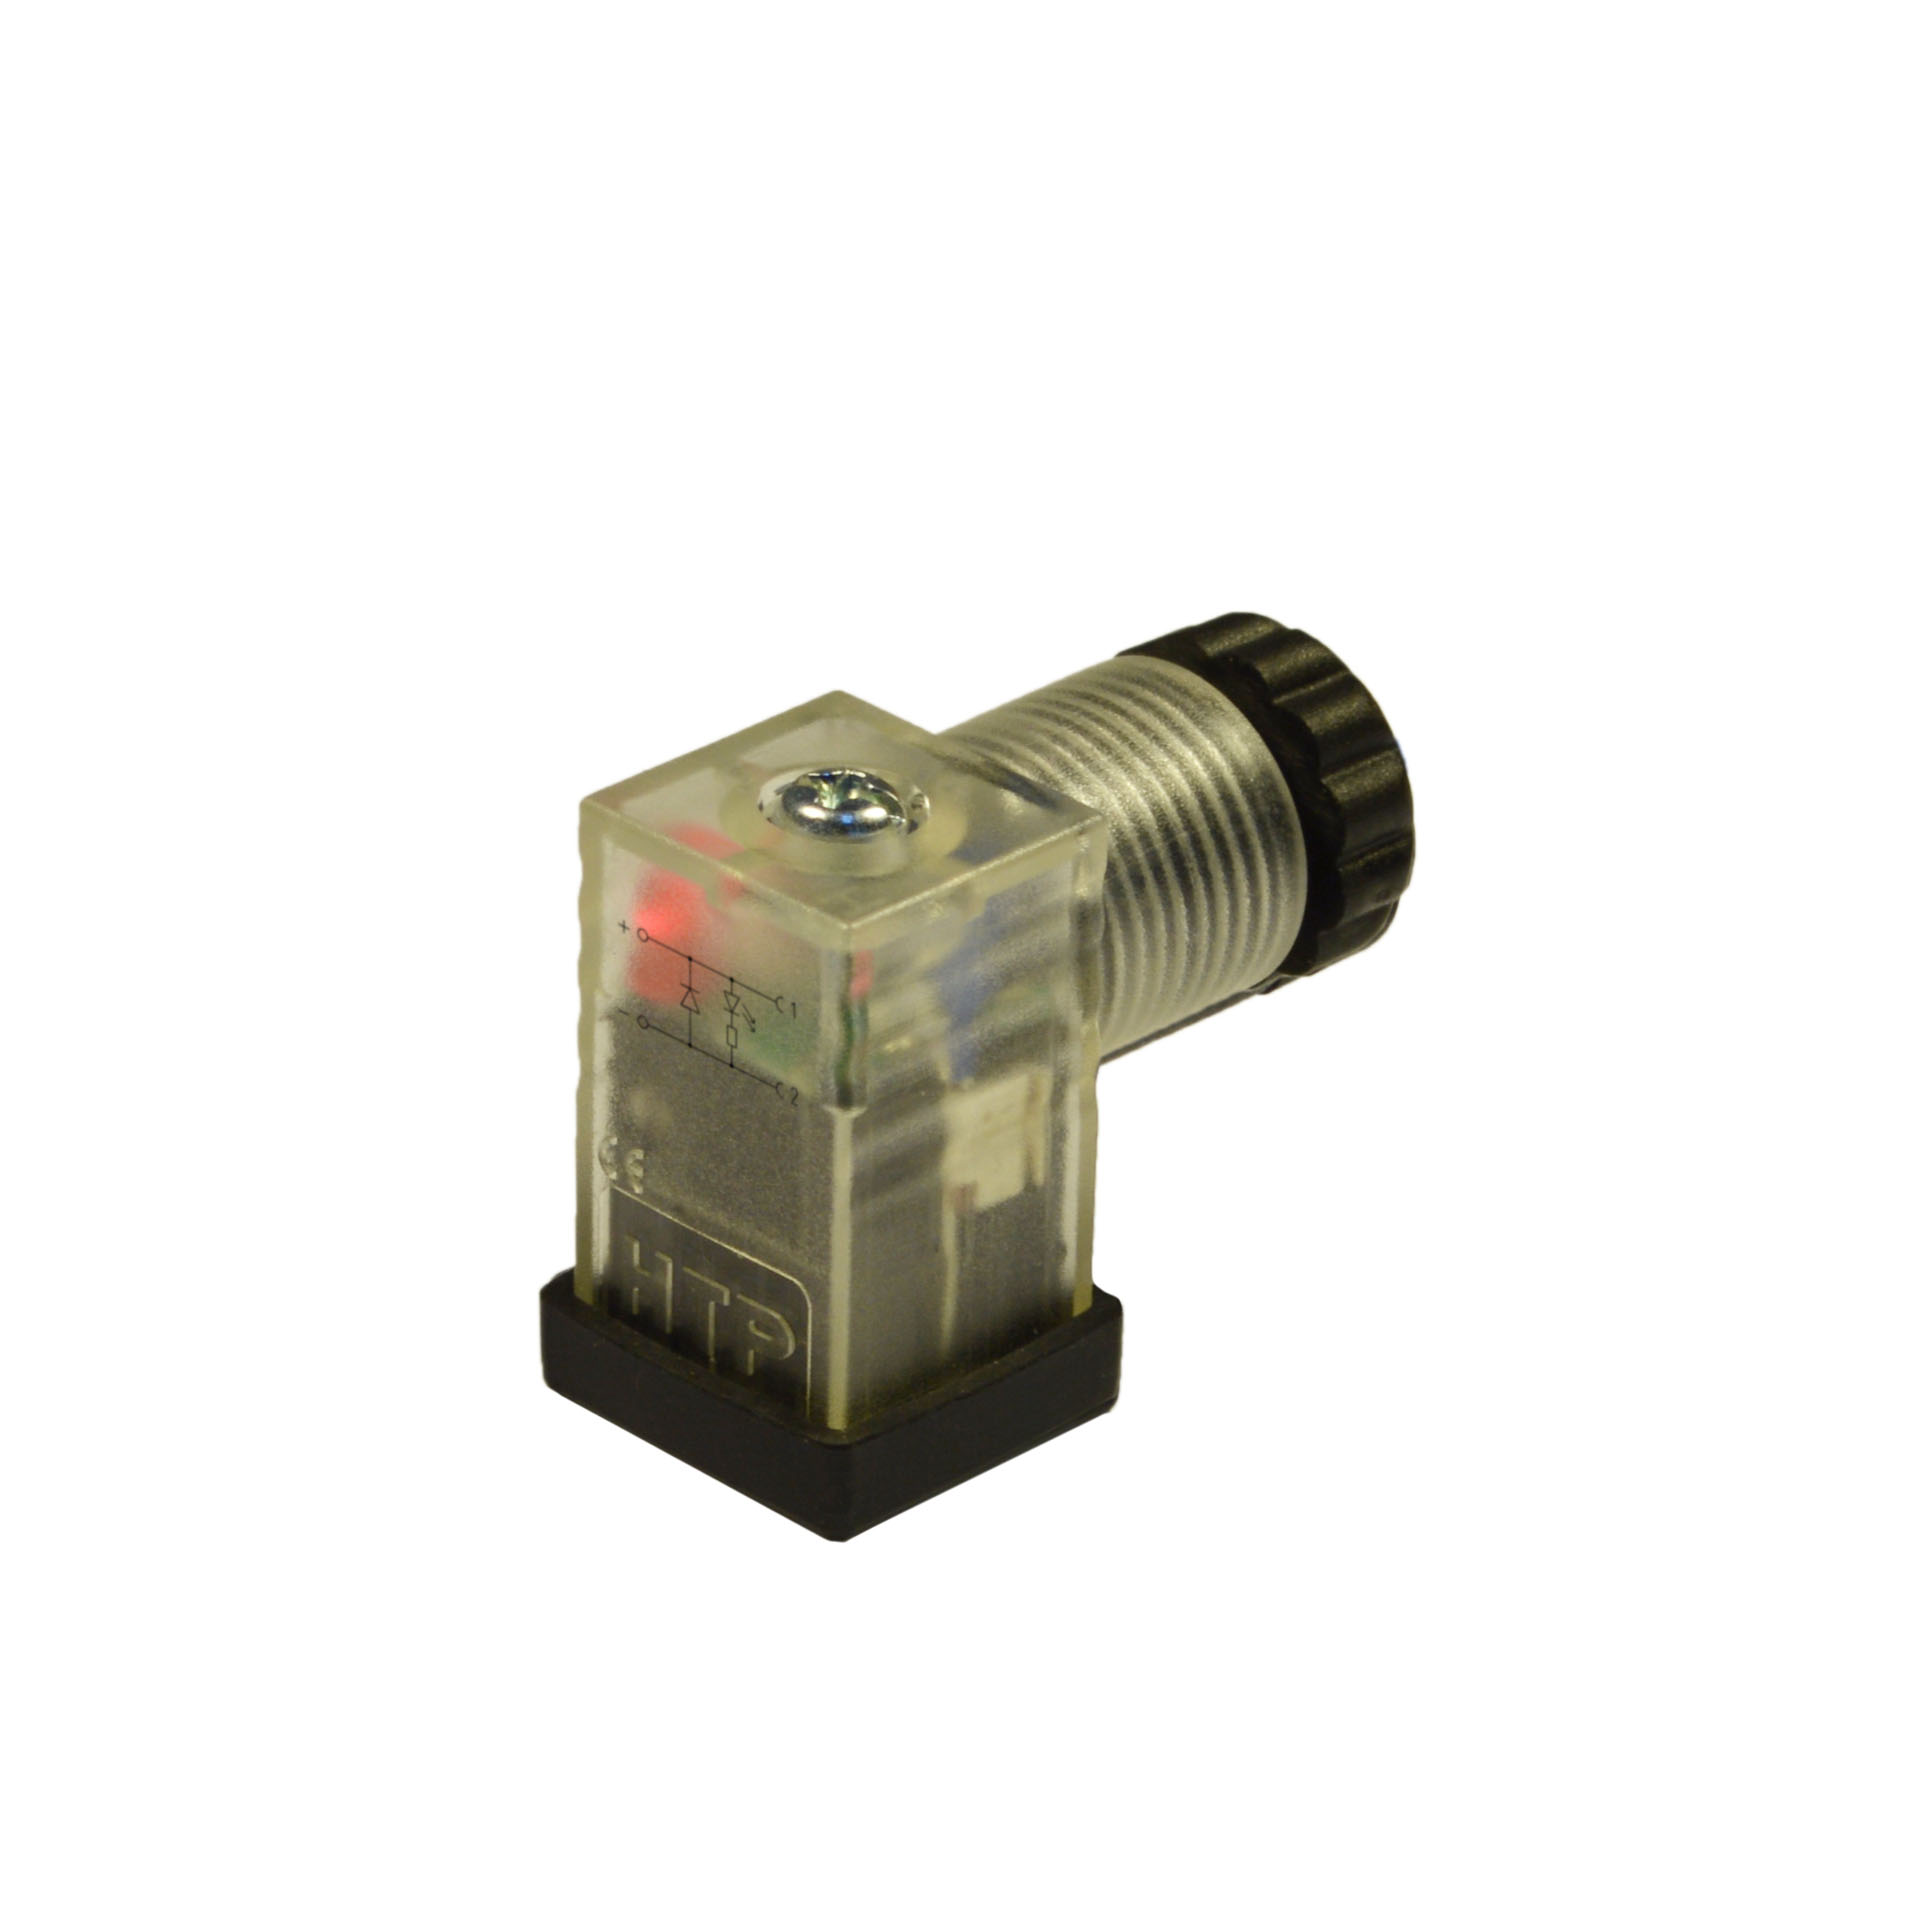 Industrial standard(typeC)field attachable,2p+PE(h.6),red LED+diode,24VDC,PG7